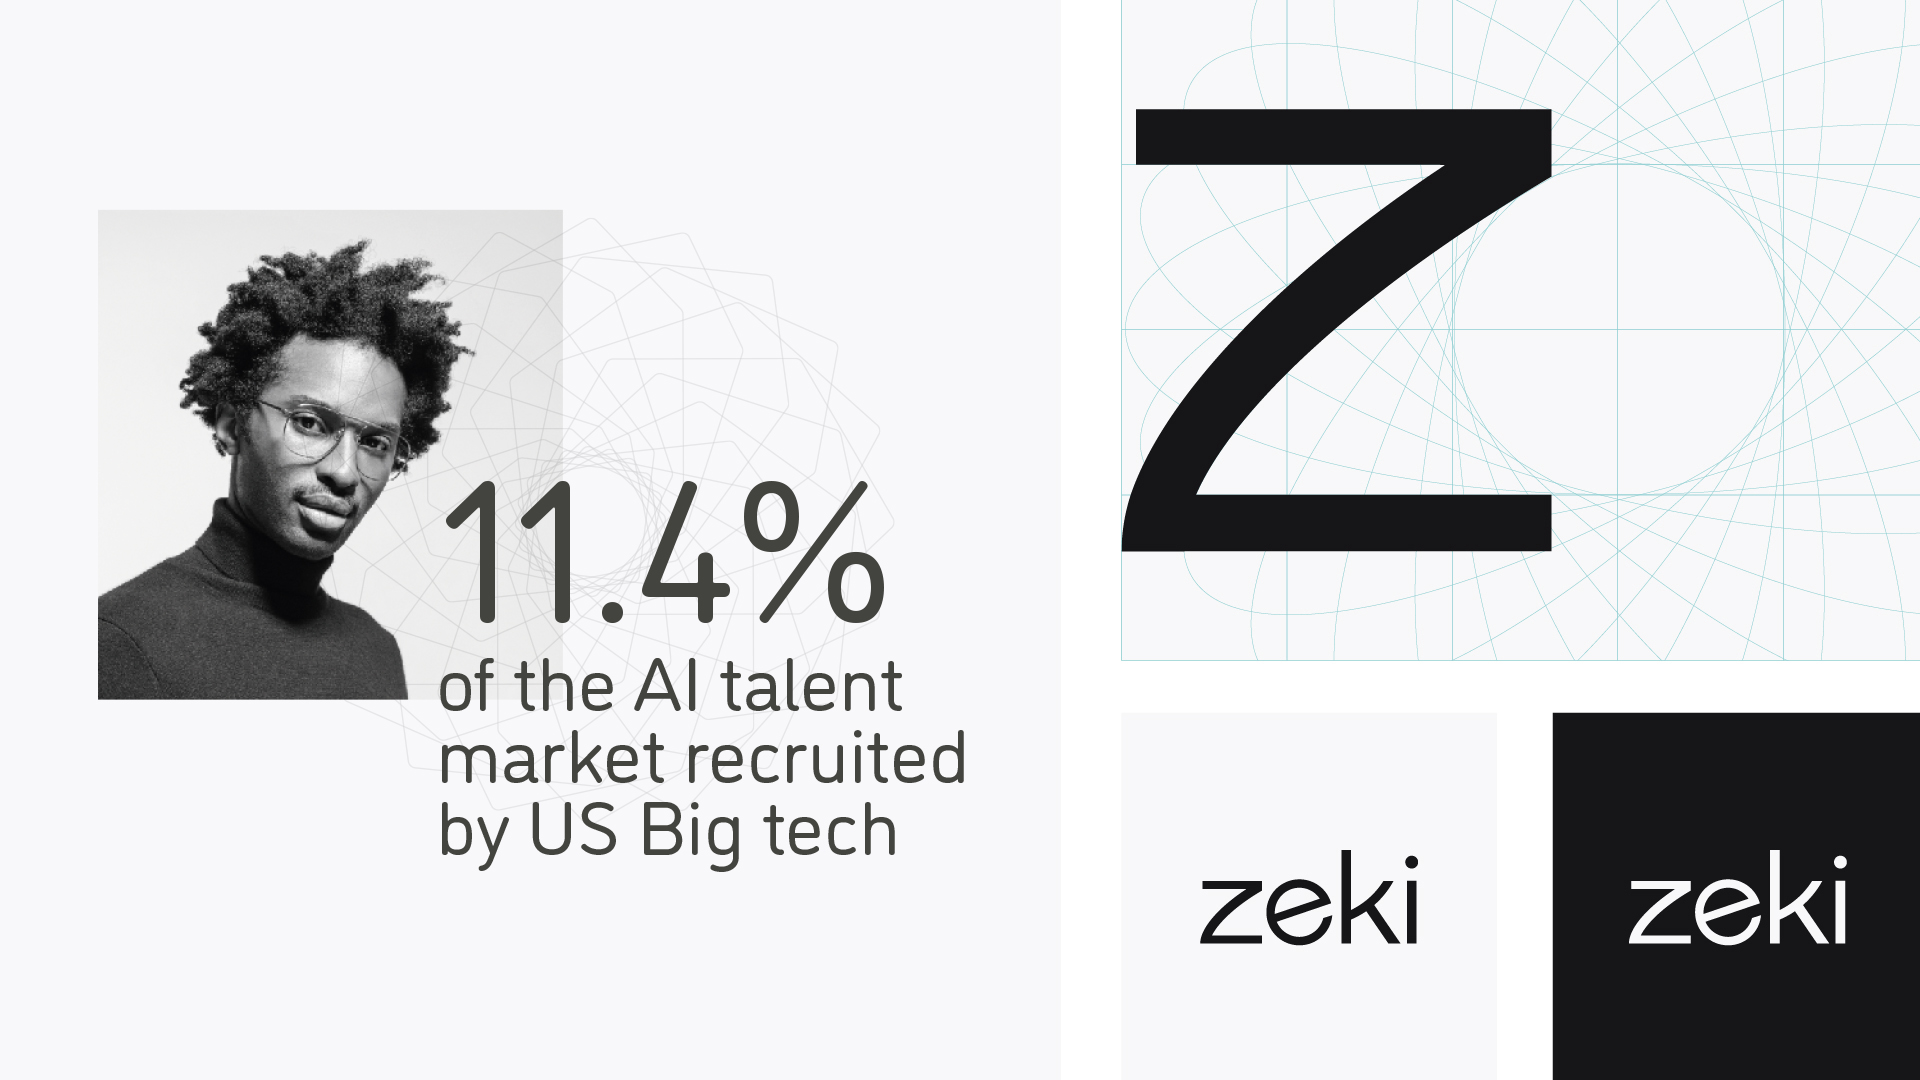 A graphic displaying "11.4% of the AI talent market recruited by US Big tech" alongside a black-and-white photo of an individual wearing glasses. The image also shows the letter "Z" and the text "zeki" in two styles: black on white and white on black.